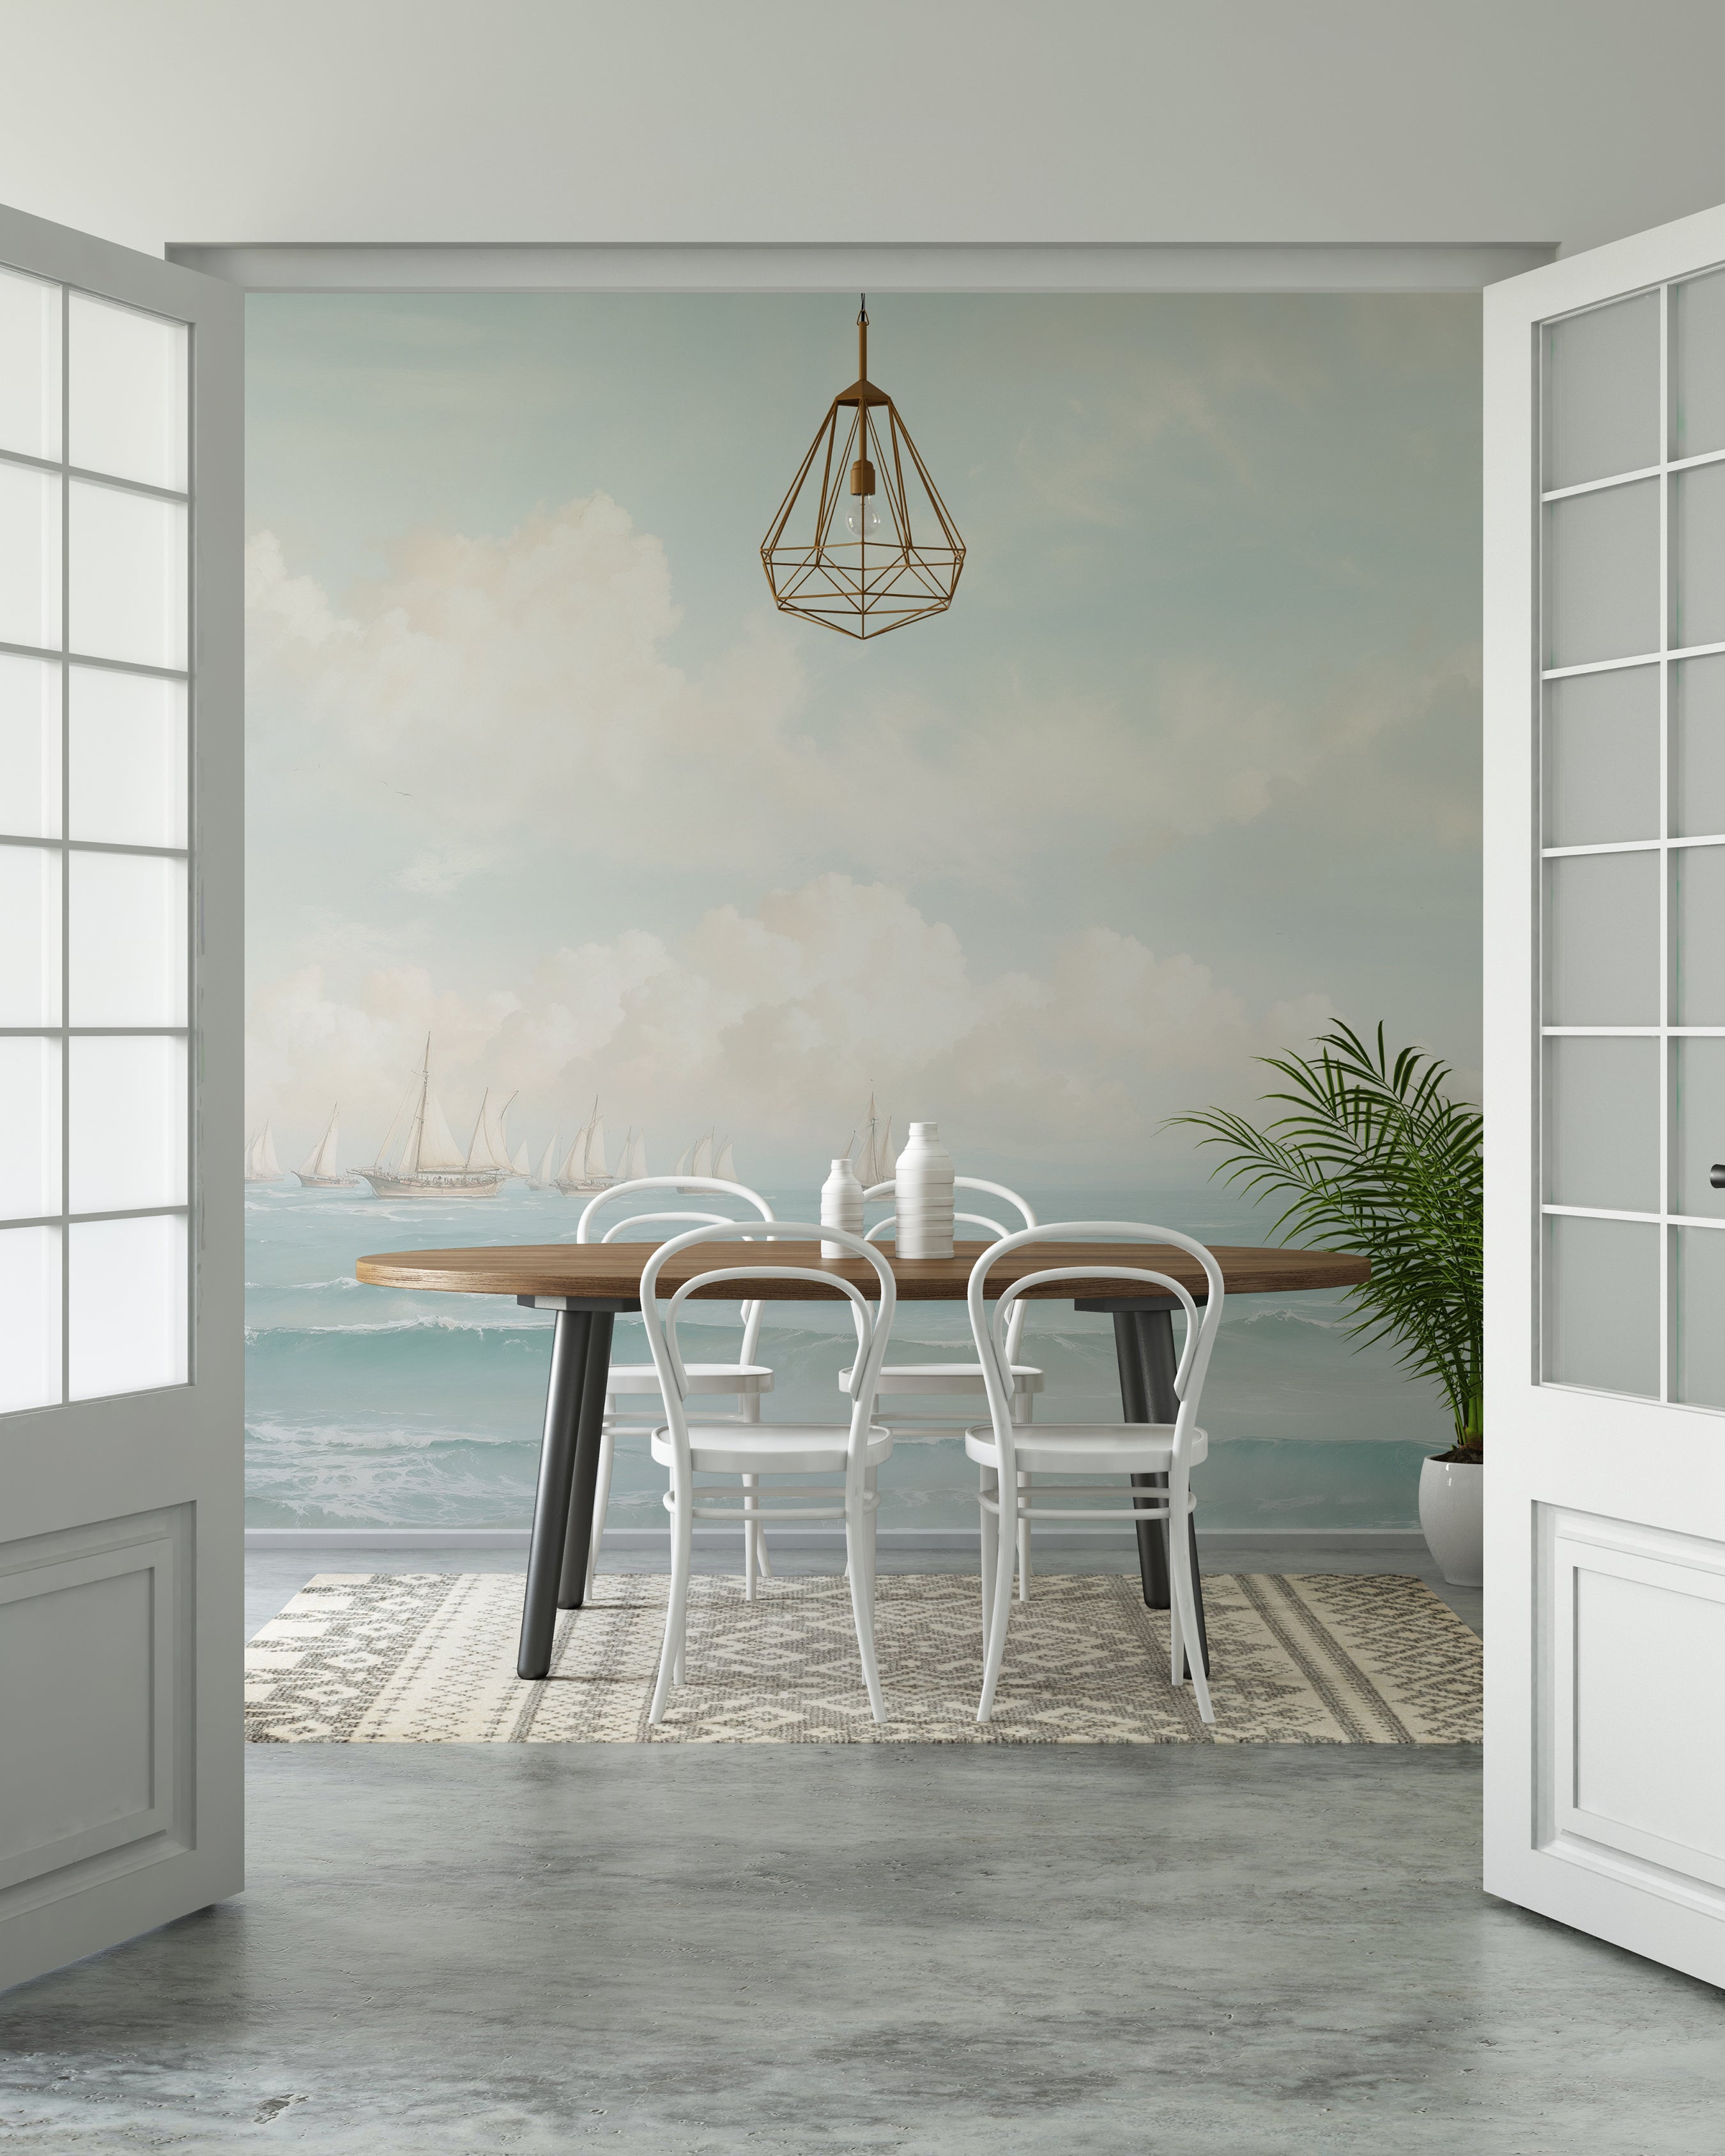 A dining area with modern furnishings set against a large wall mural of a light and airy seascape featuring distant sailboats. The scene includes a hanging geometric light fixture and a pair of glass doors filling the room with natural light.